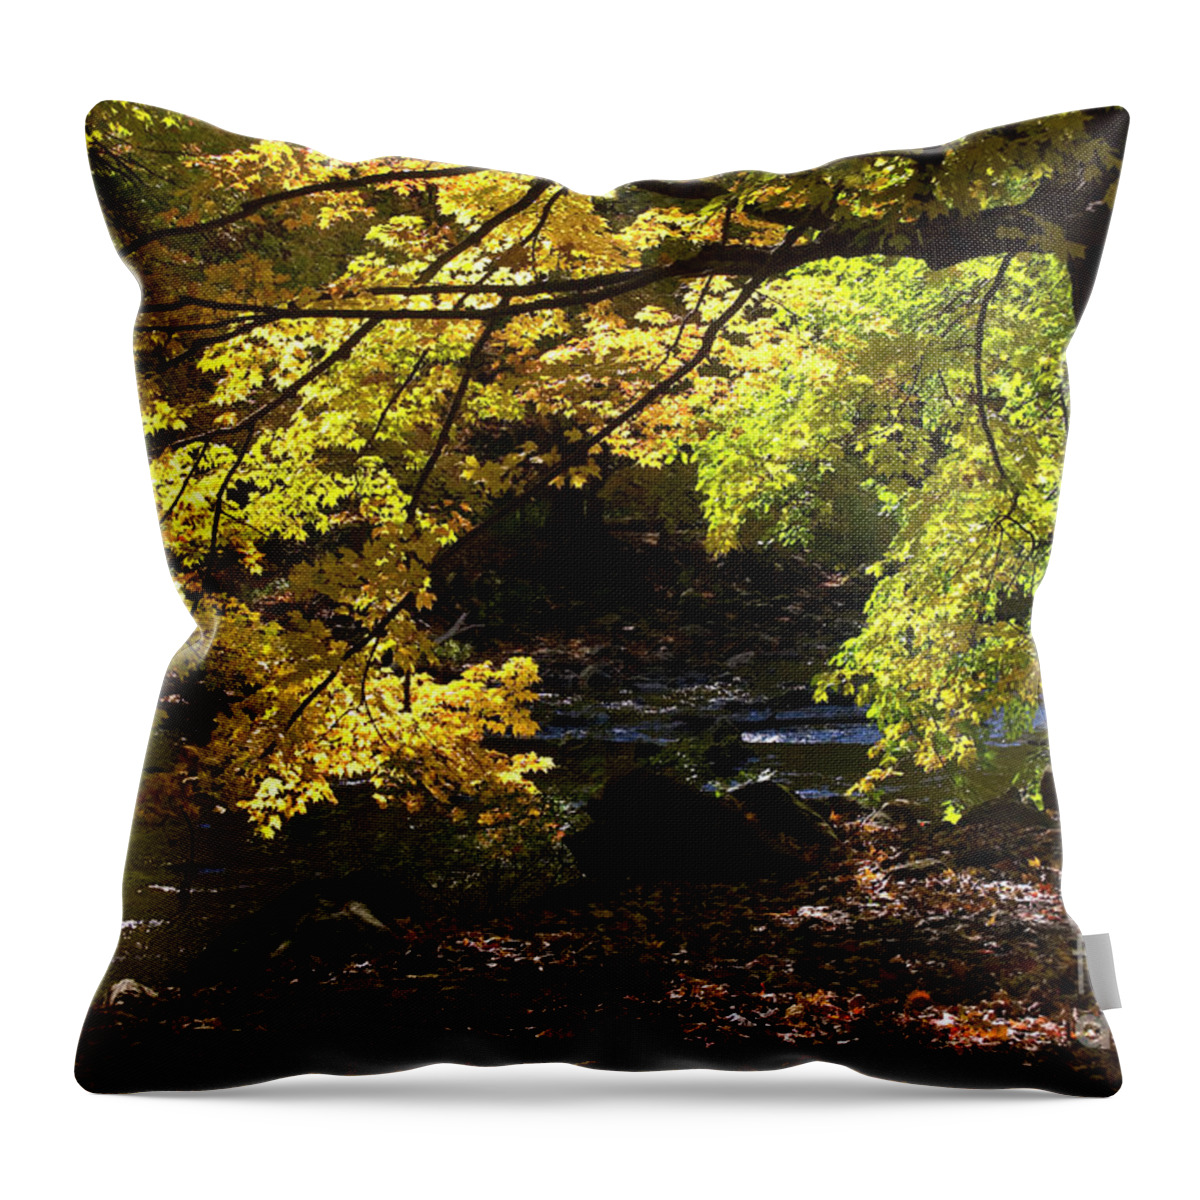 Autumn Throw Pillow featuring the pyrography Autumn Stream by Tom Brickhouse